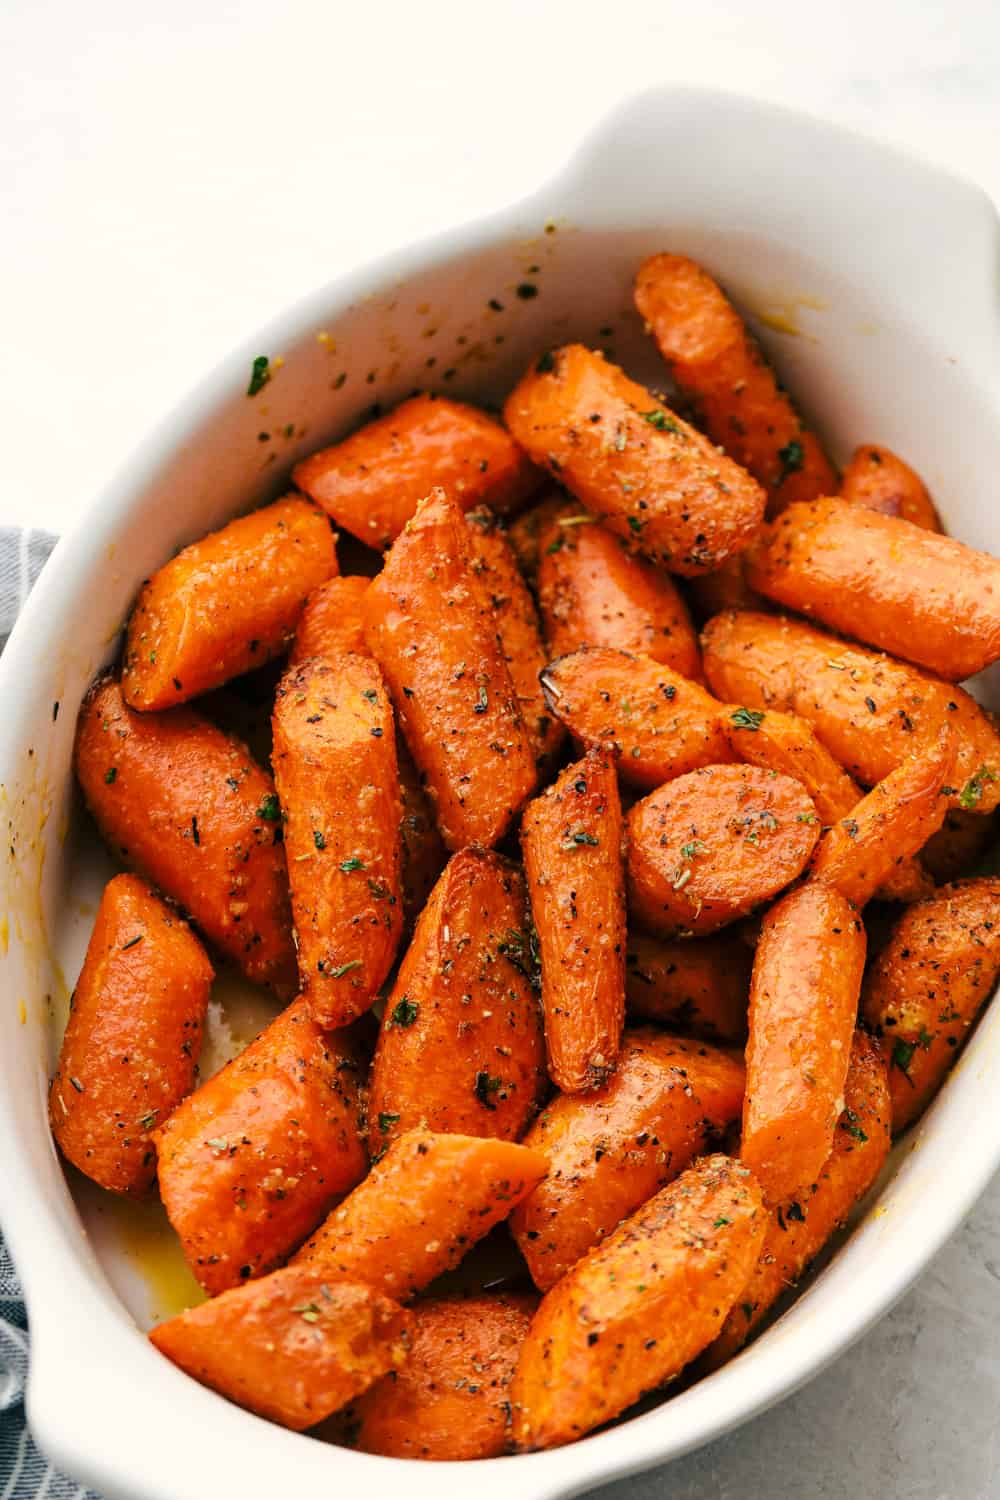 "Roasted" Air Fryer Carrots Recipe | The Recipe Critic